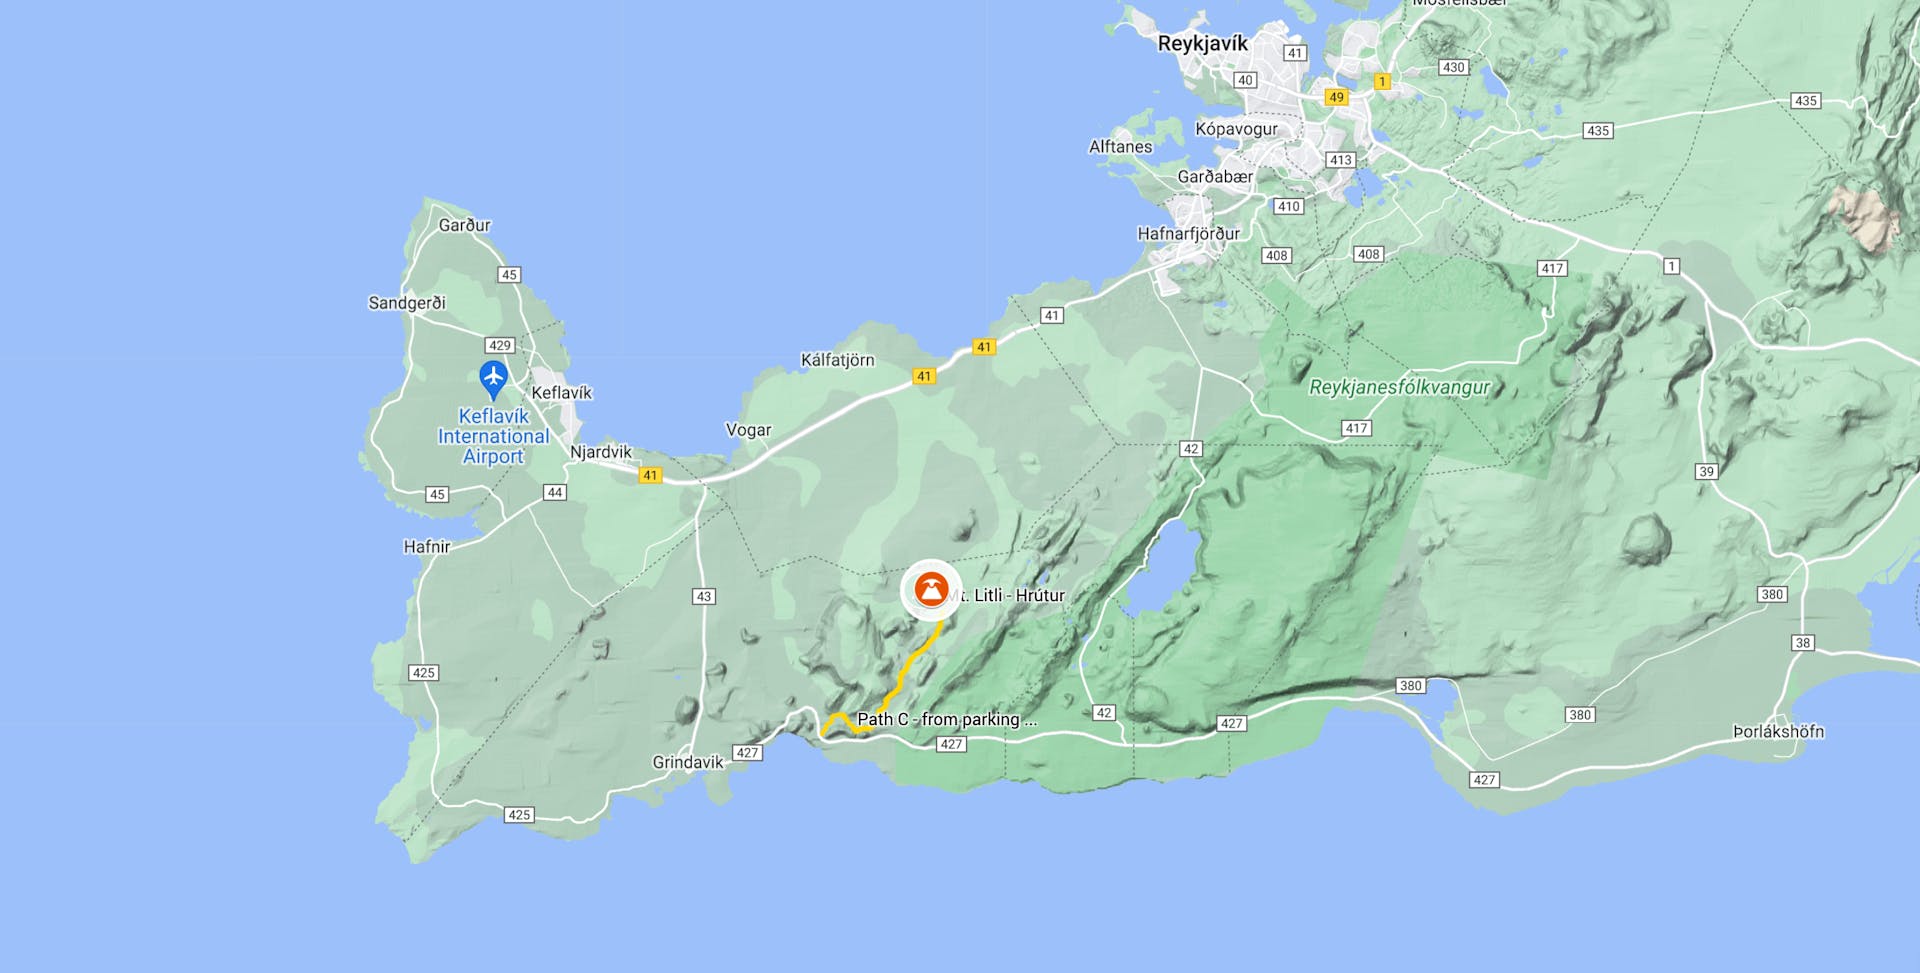 Location of the eruption